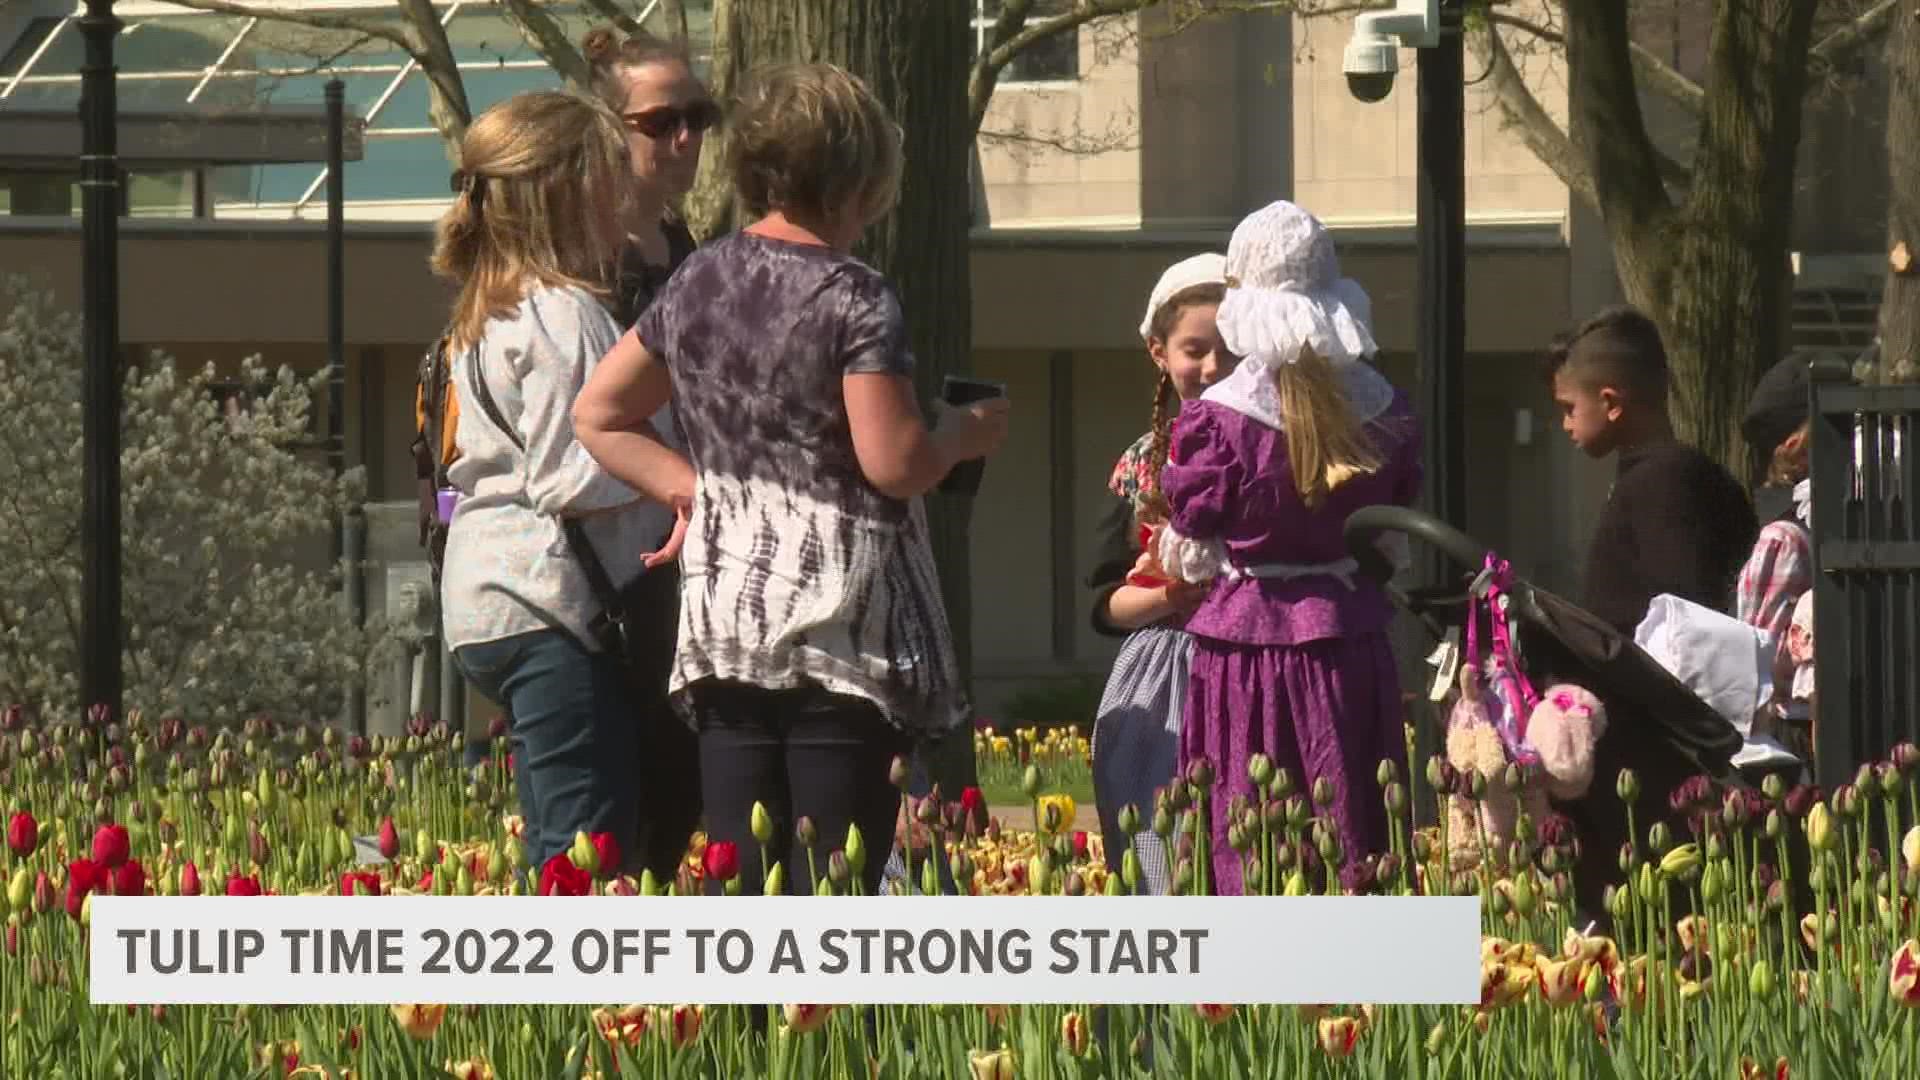 Tulip Time 2022 has broken records with its opening weekend. The beautiful weather and new attractions brought in the crowds.